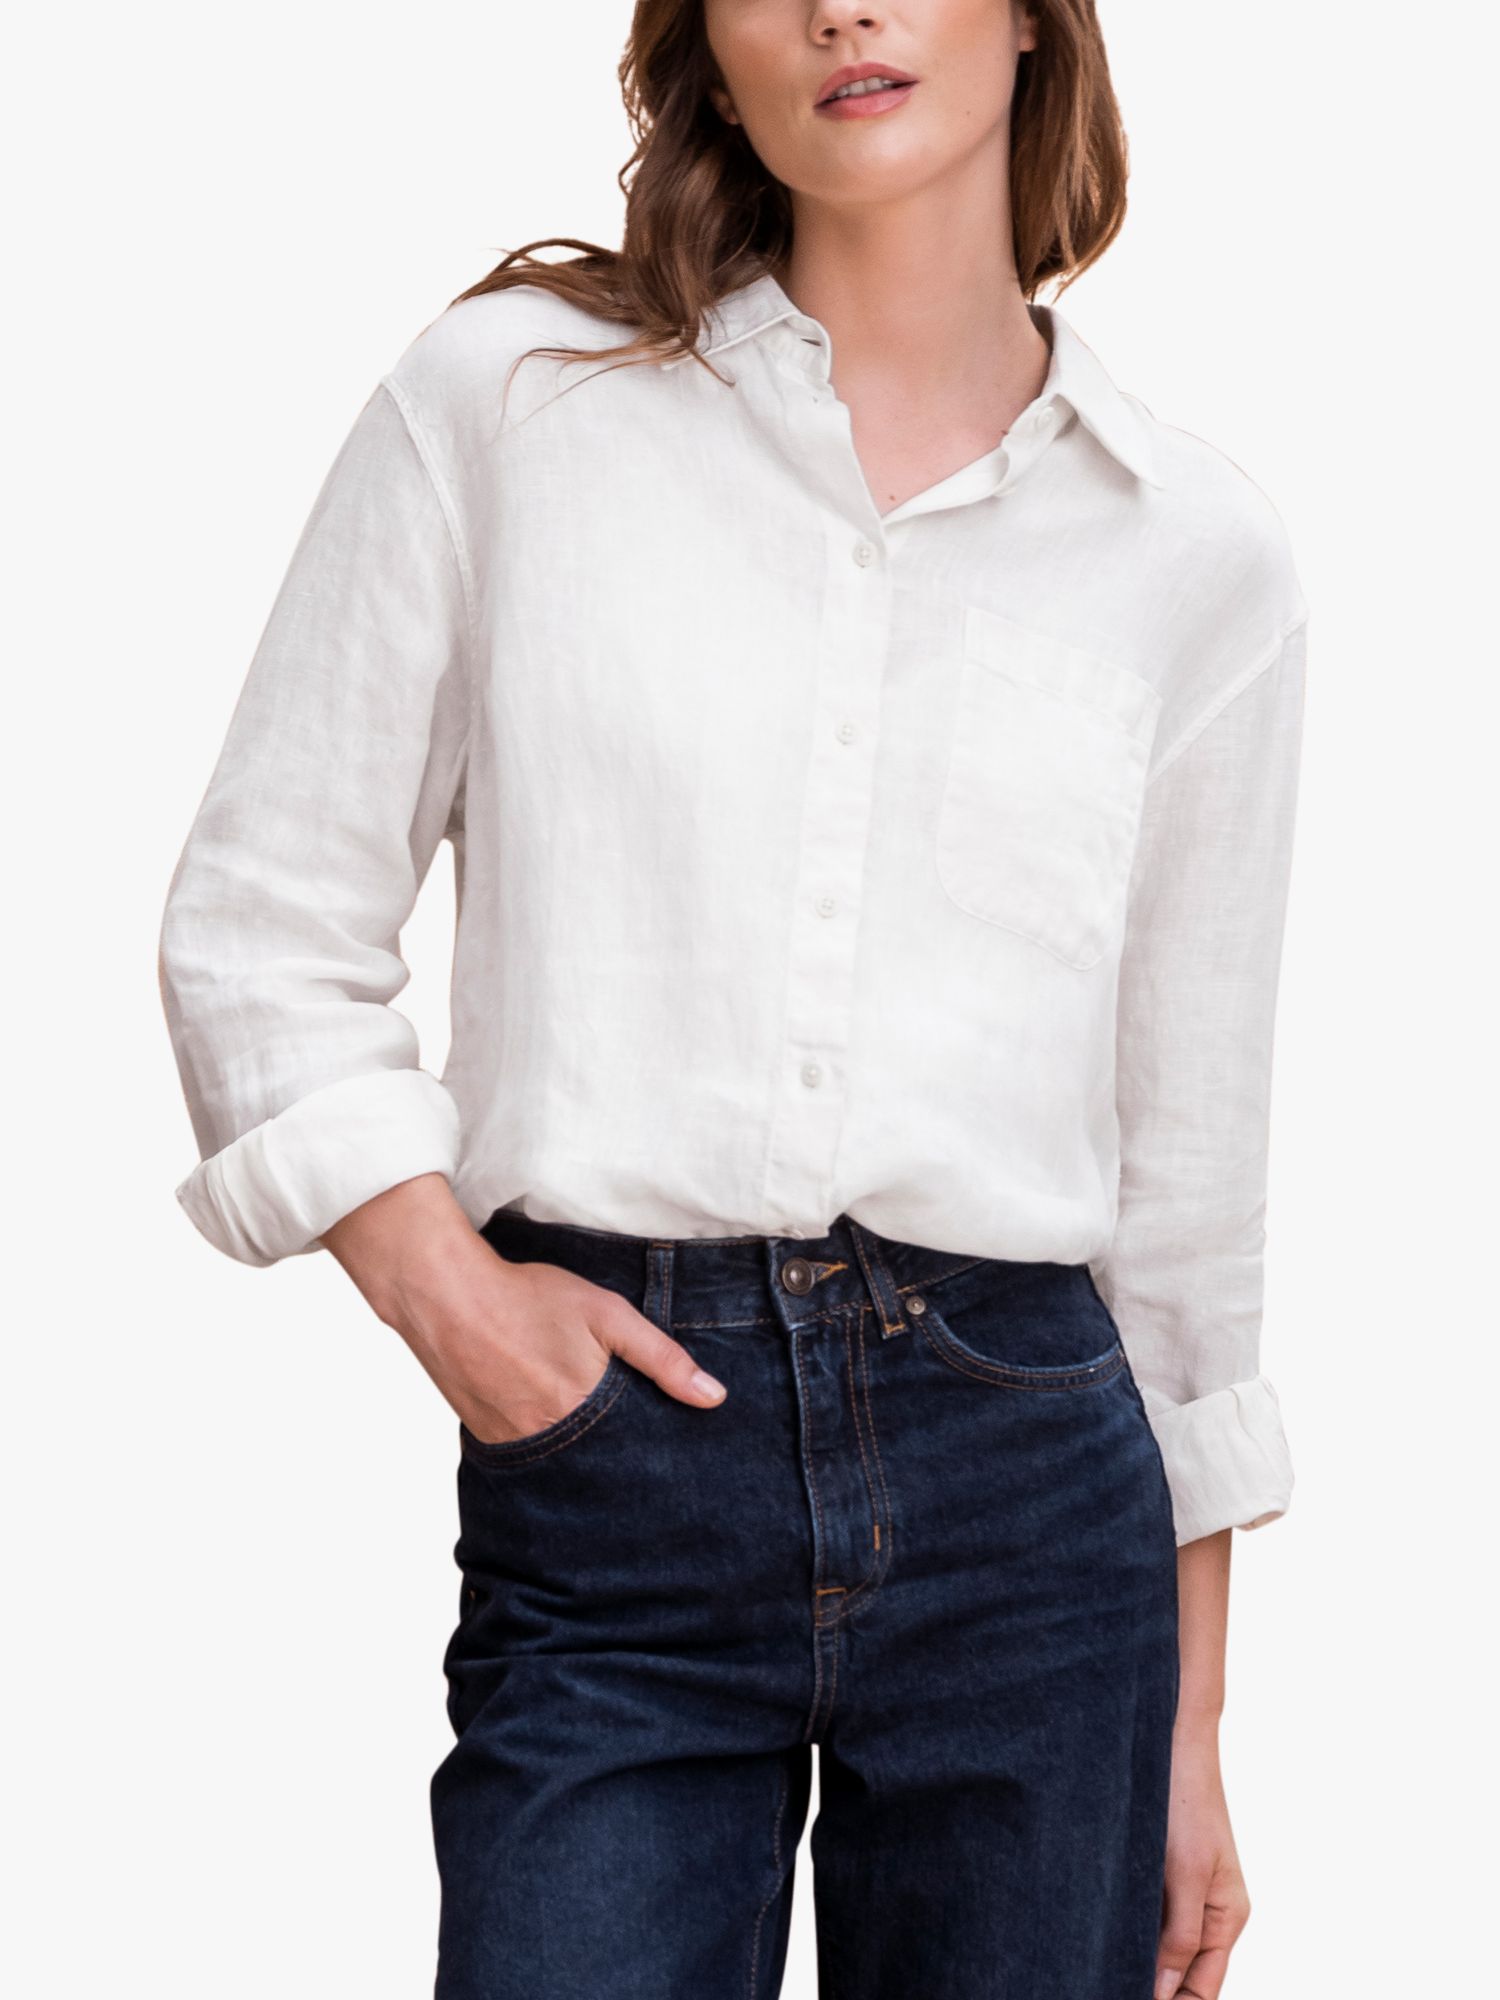 Women's Relaxed Fit Shirts